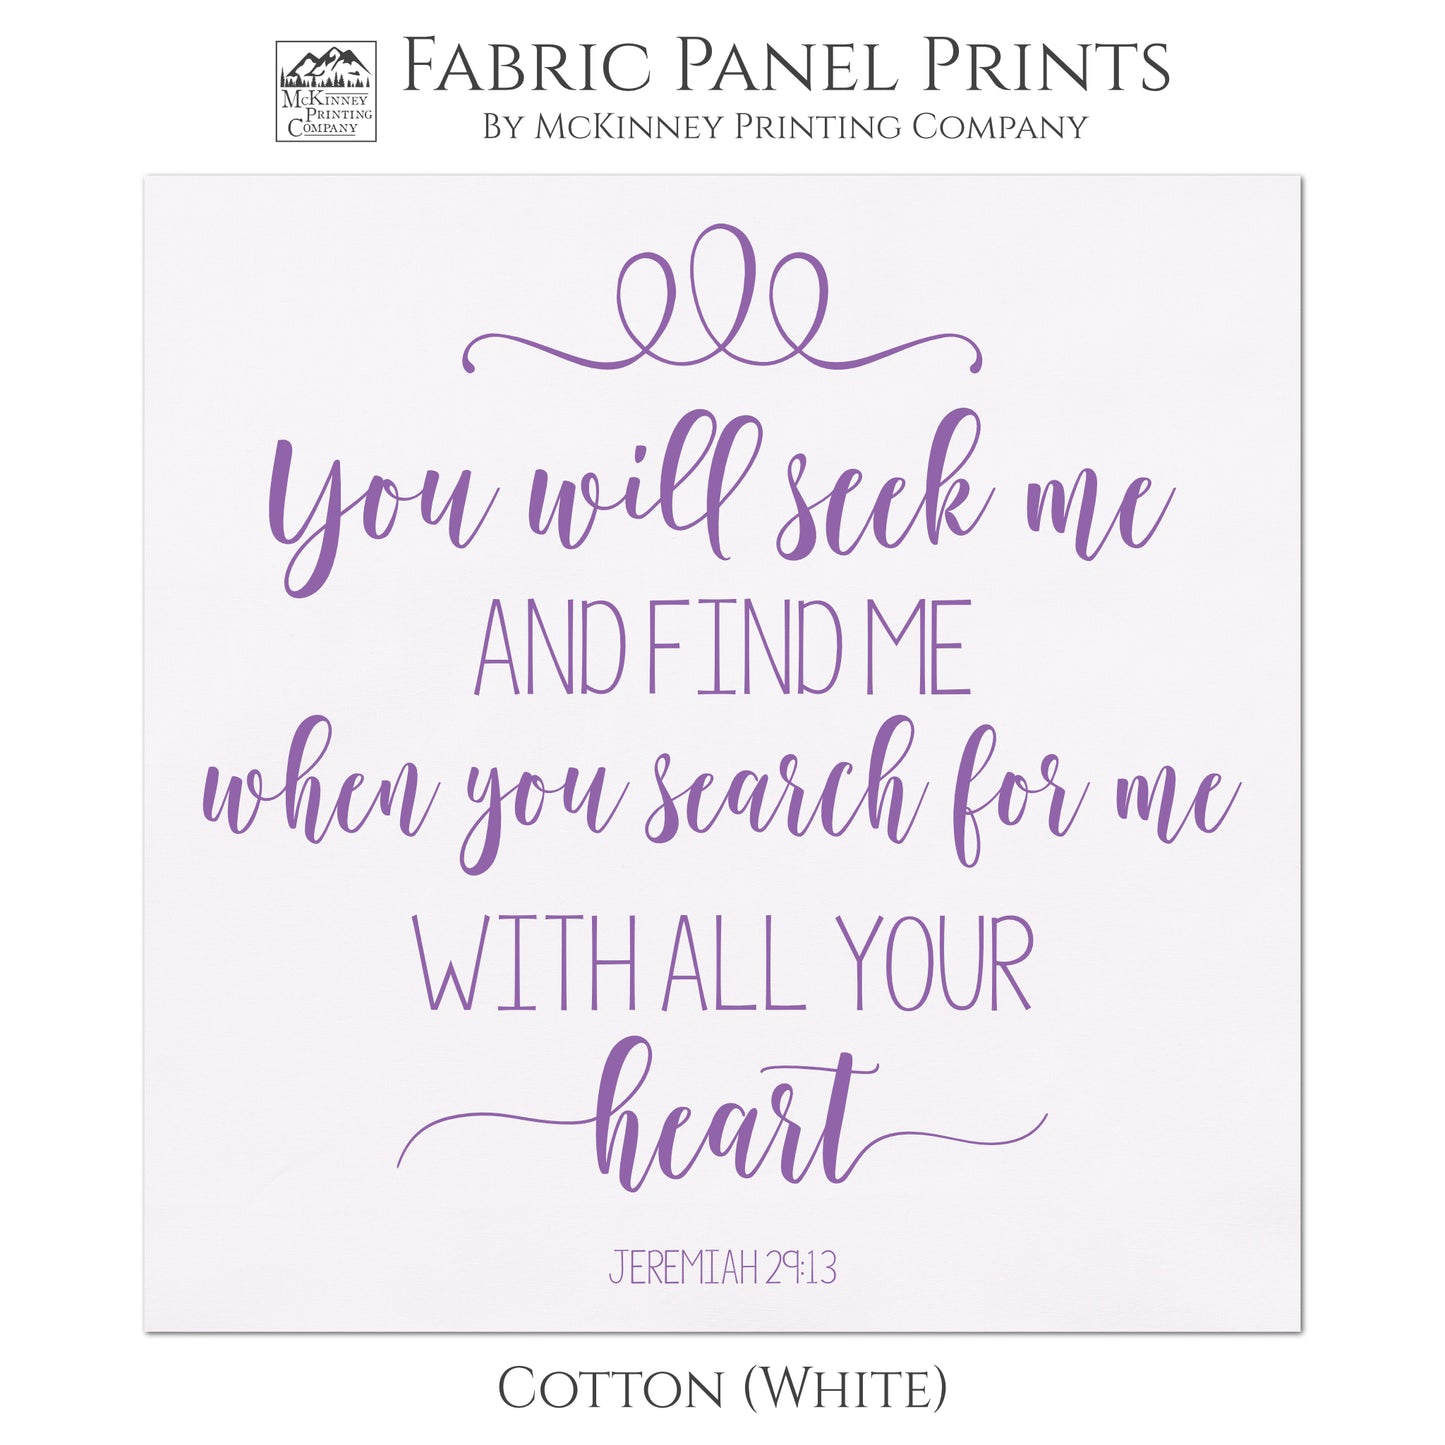 Jeremiah 29 13, Bible Verse, Large Print Fabric, Panel, Block Print Fabric, Cotton, Muslin - Quilt Supplies, Materials, Wall Art, Bags, Sewing Projects - Cotton, White